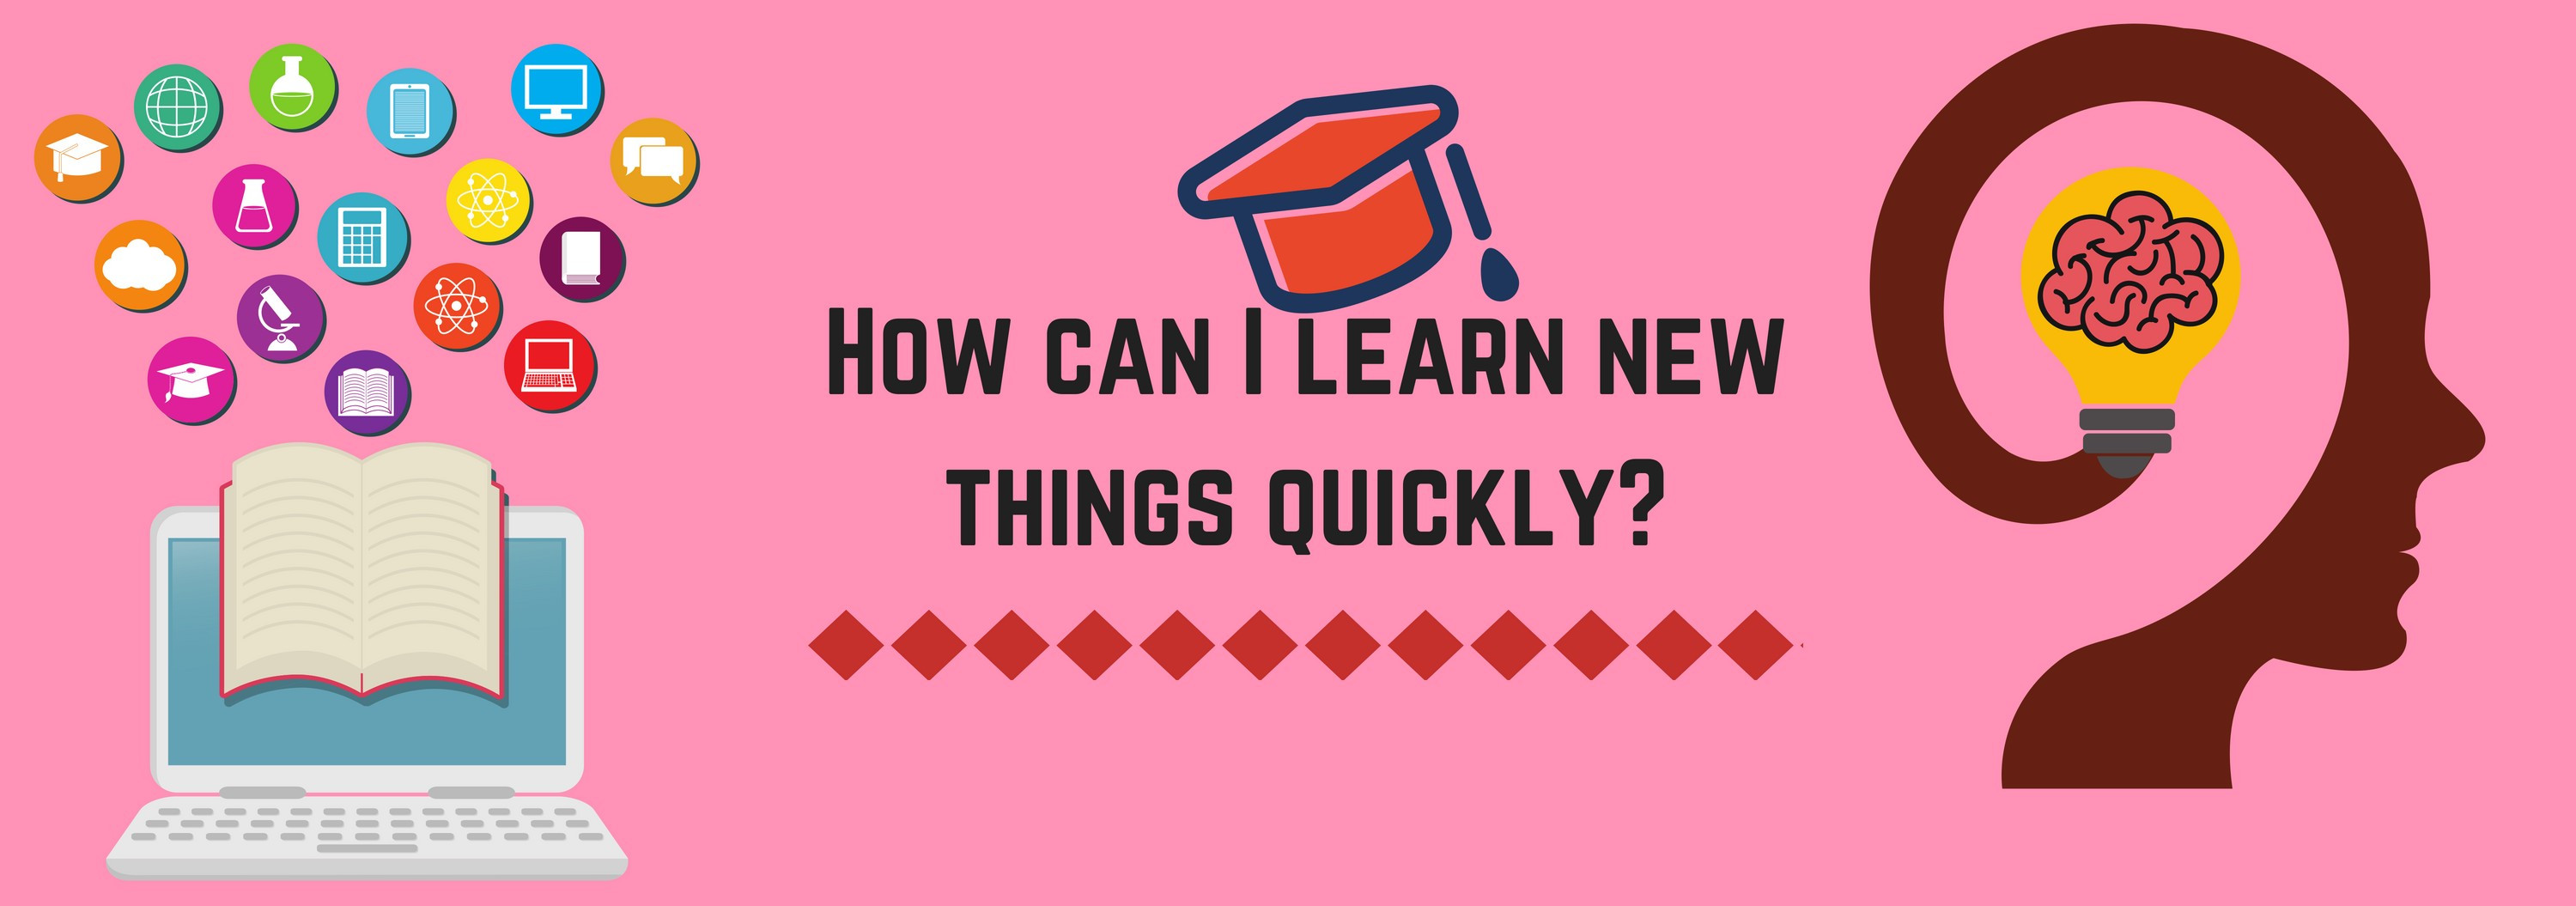 How can I learn new things quickly?